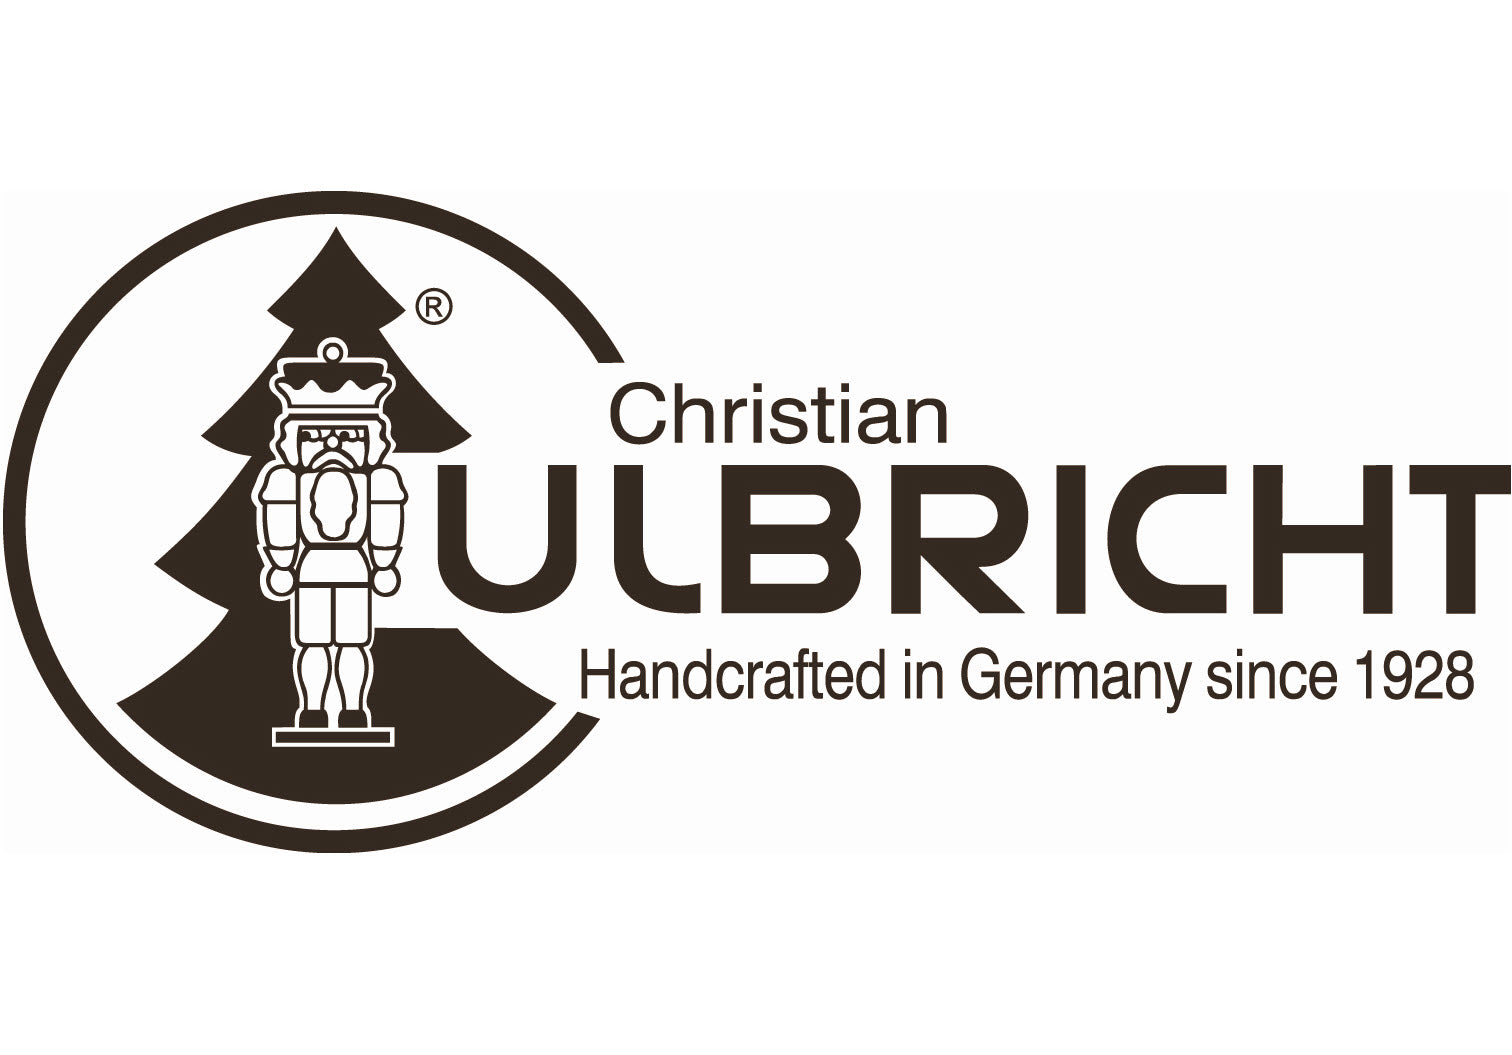 Christian Ulbricht - Handcrafted in Germanyy since 1928